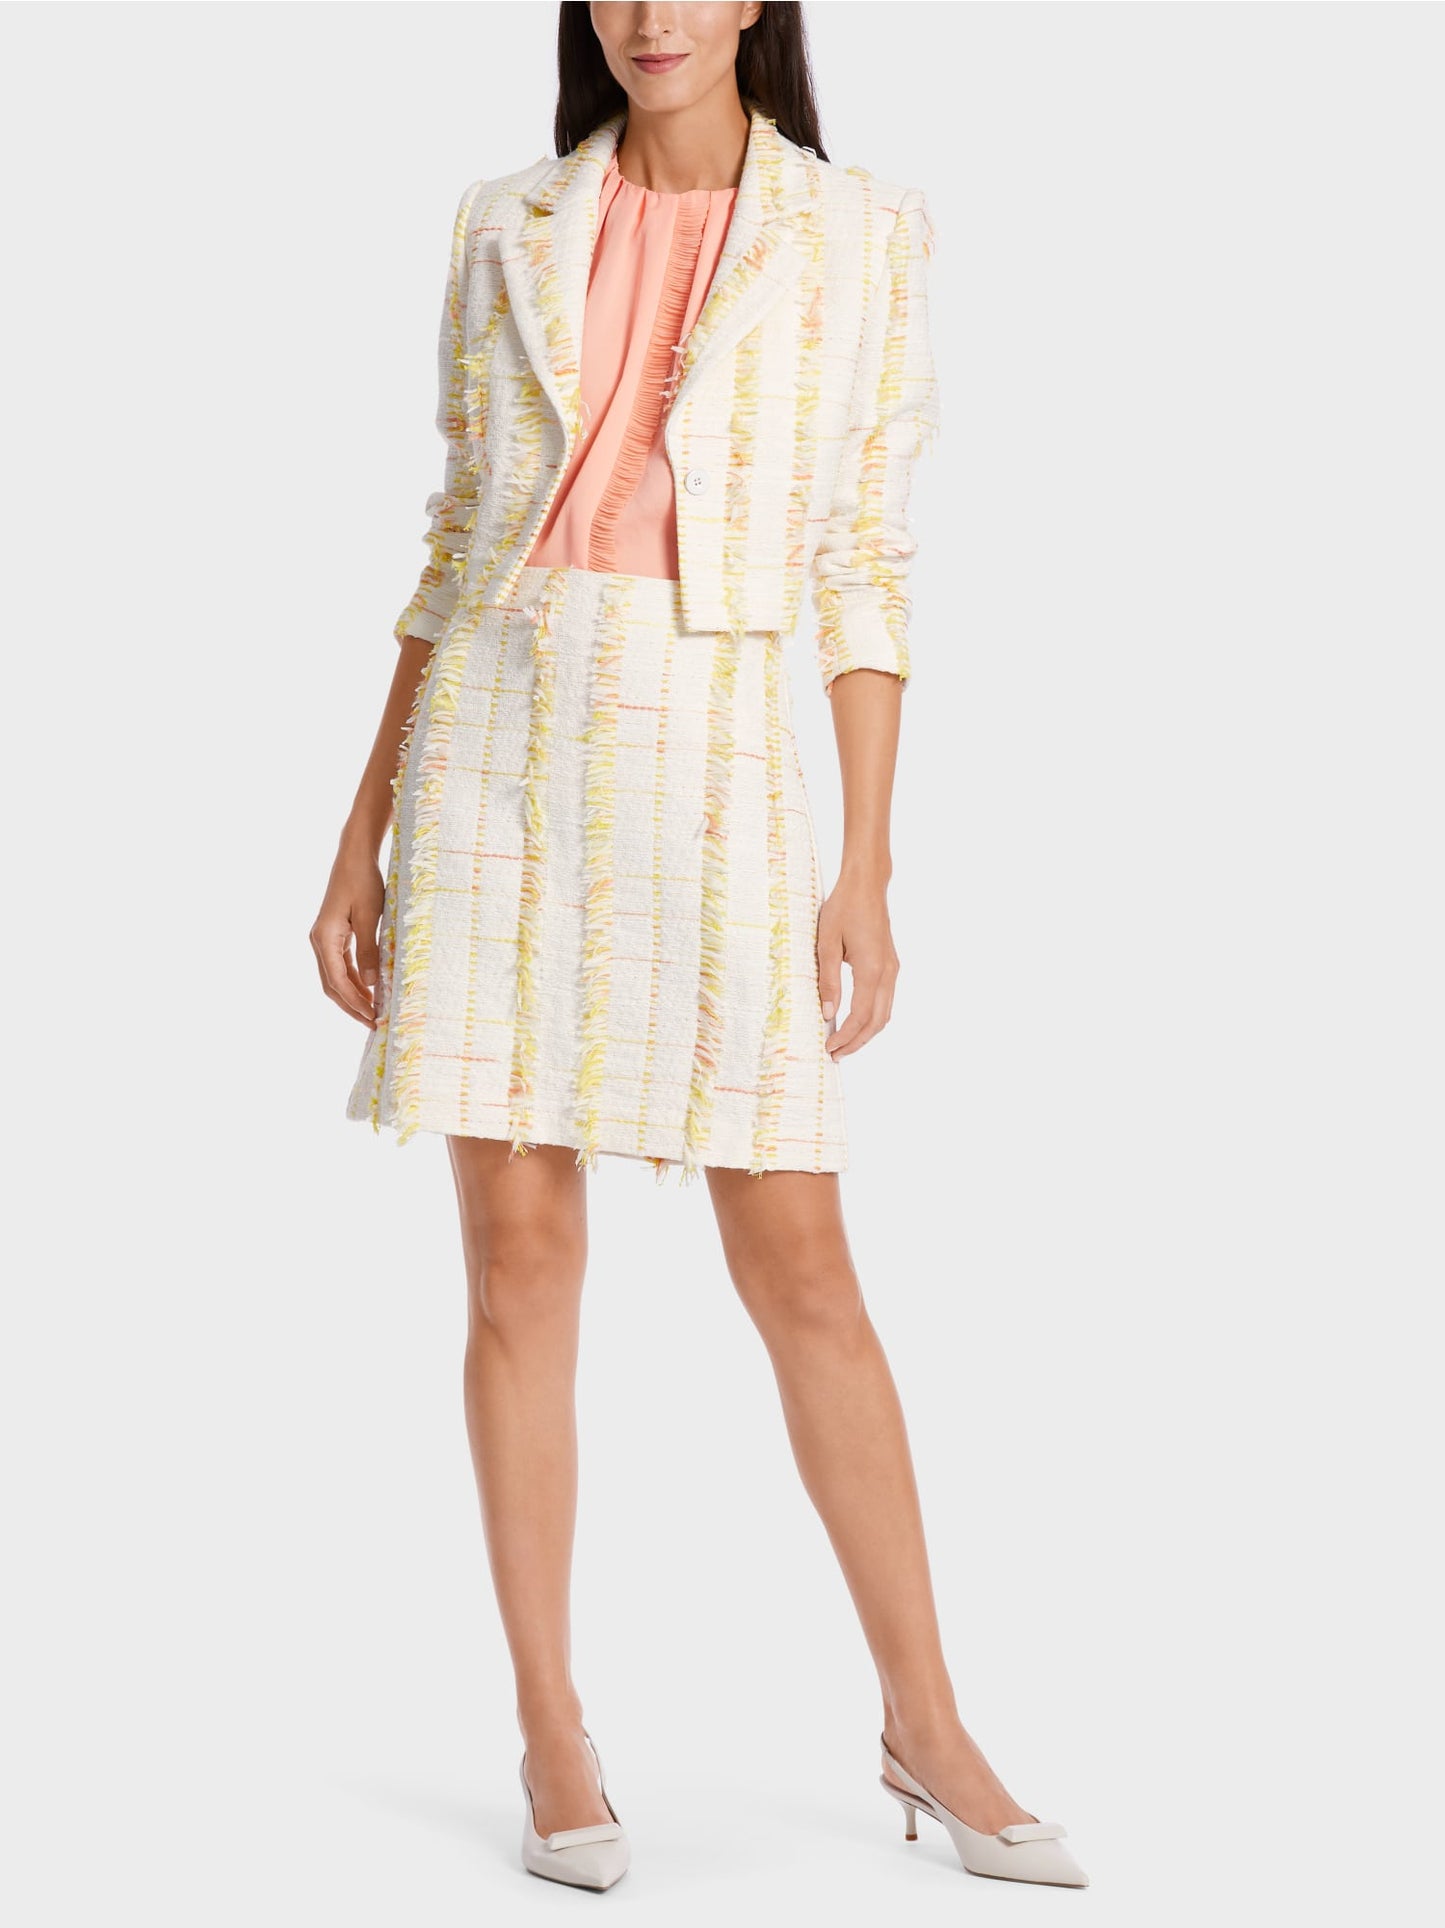 Marc Cain Short Blazer With Quilted Edges in Pale Lemon